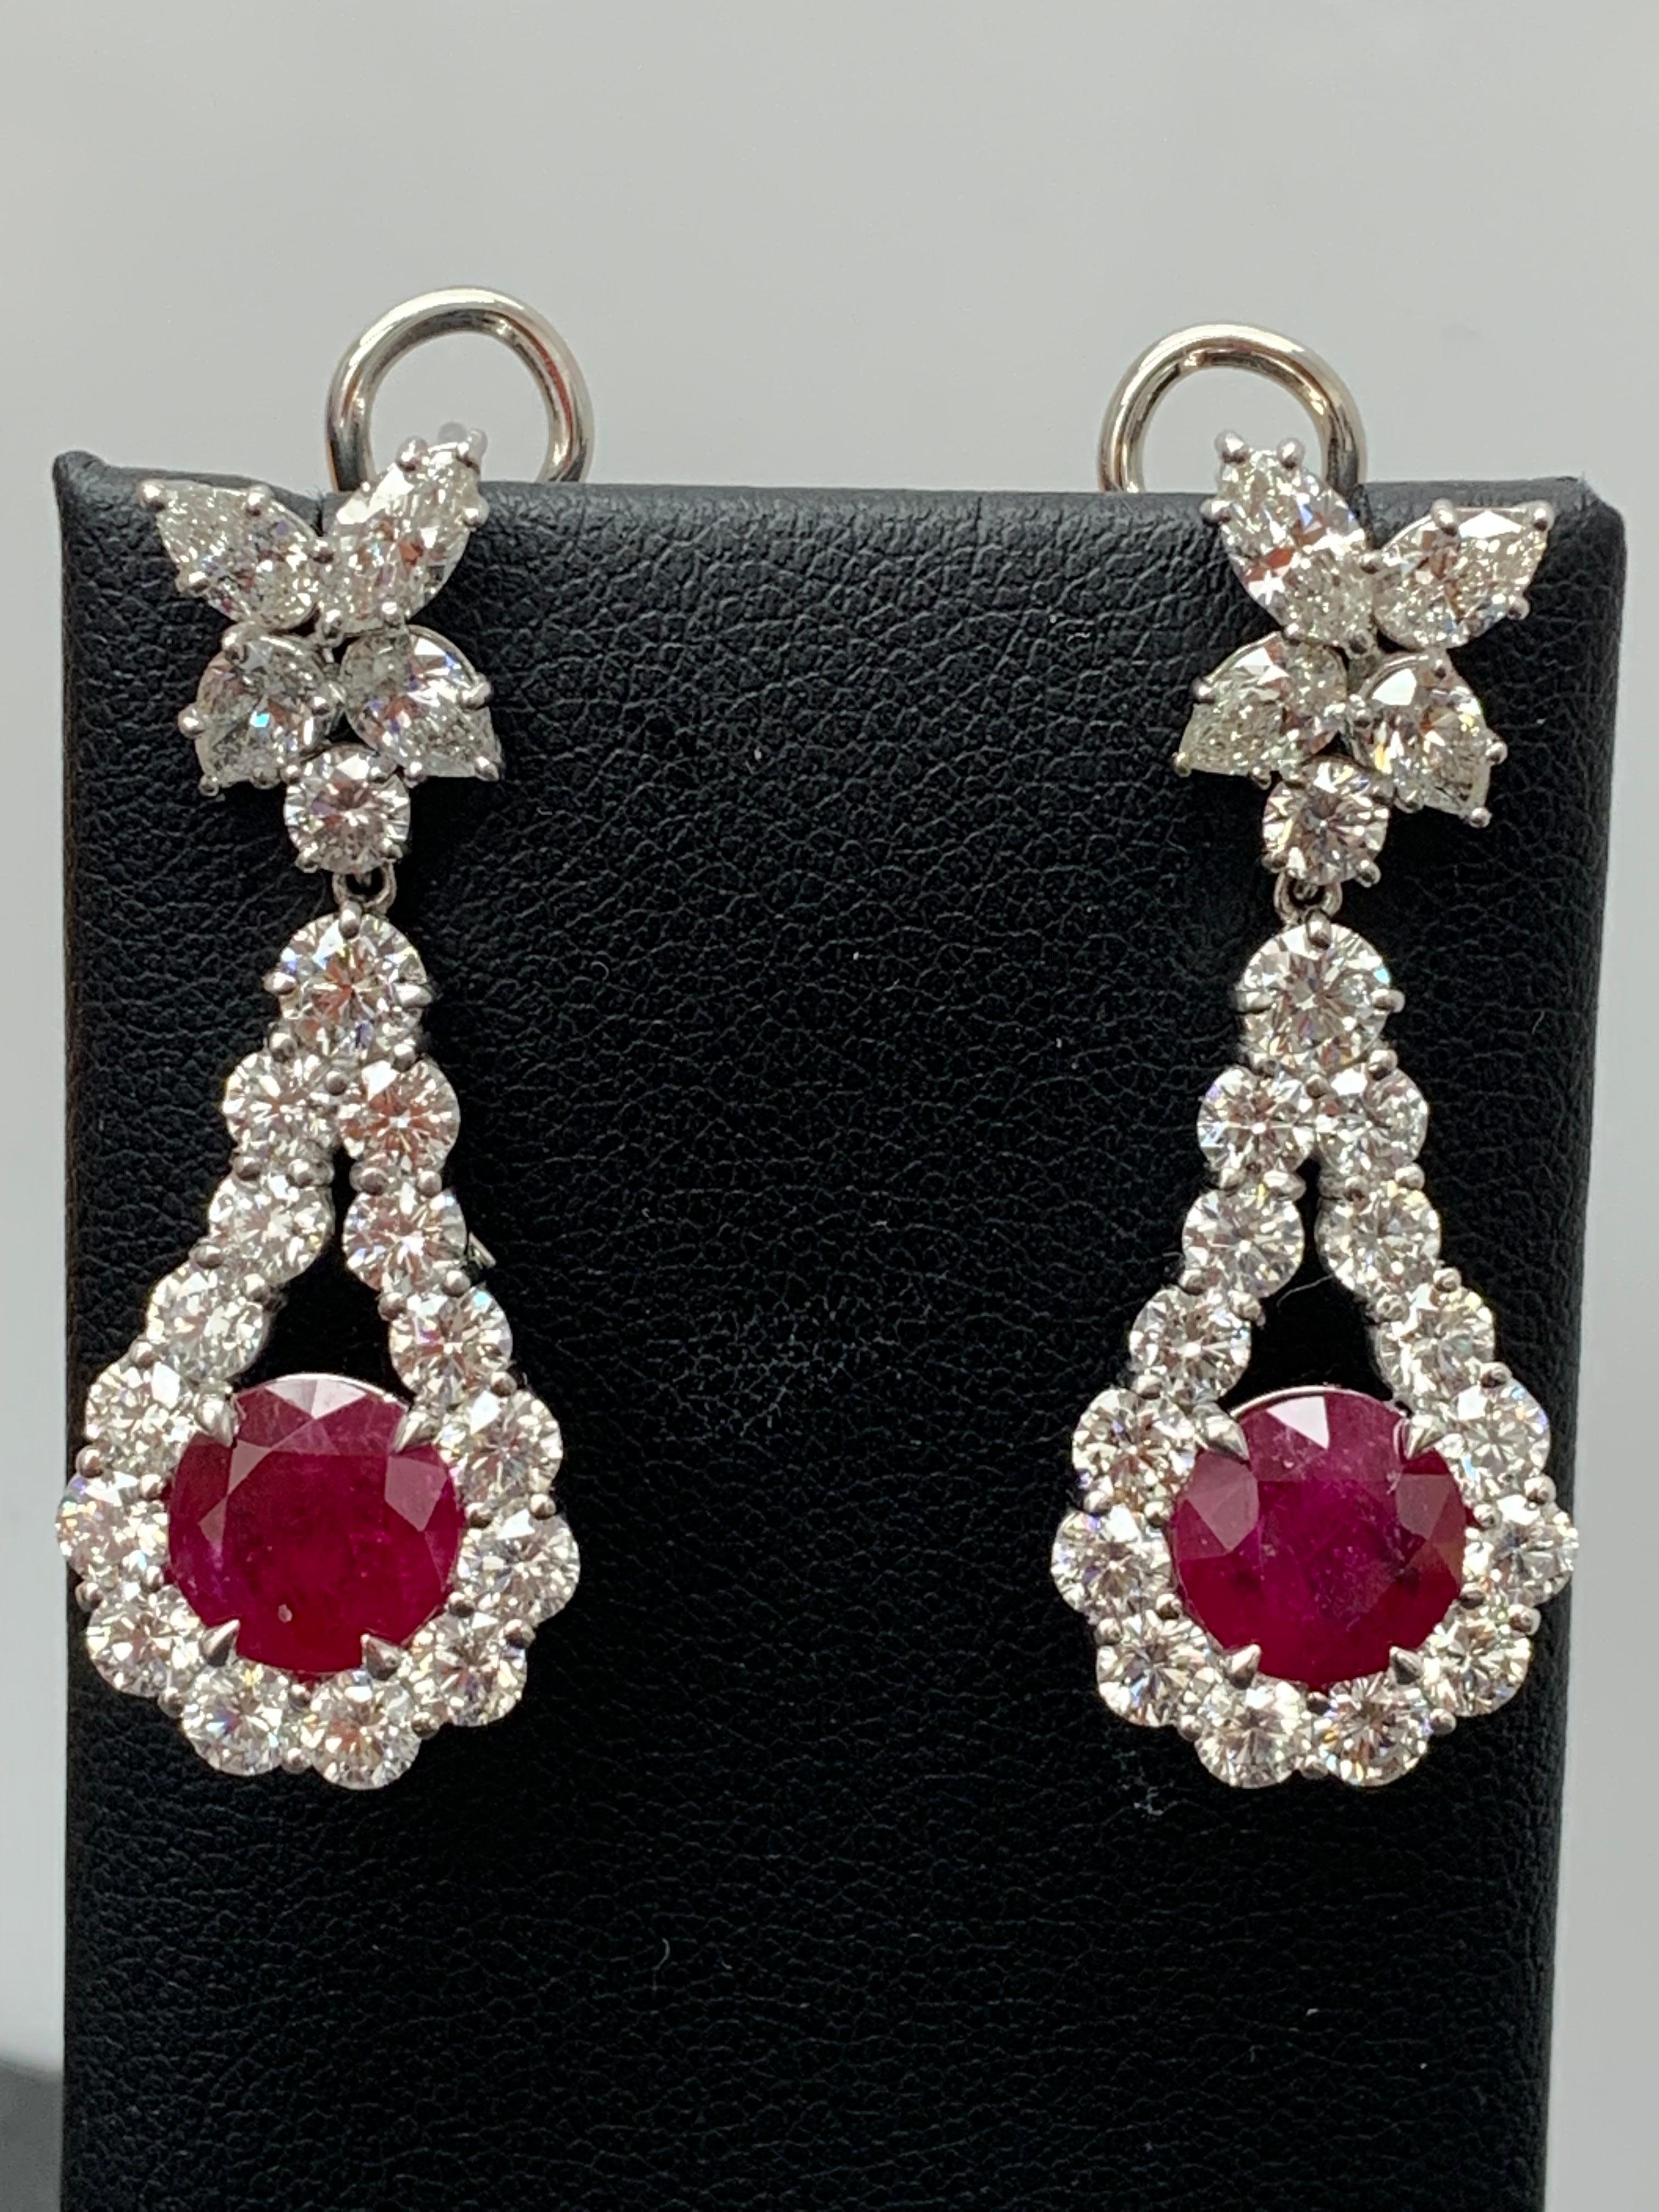 A beautiful and chic pair of drop earrings showcasing a cluster of brilliant mixed-cut diamonds, and round-cut rubies set in an intricate and stylish design. 10 Mixed cut Diamonds weigh 1.91 carats in total. 2 vivid red rubies weigh 4.20 carats in